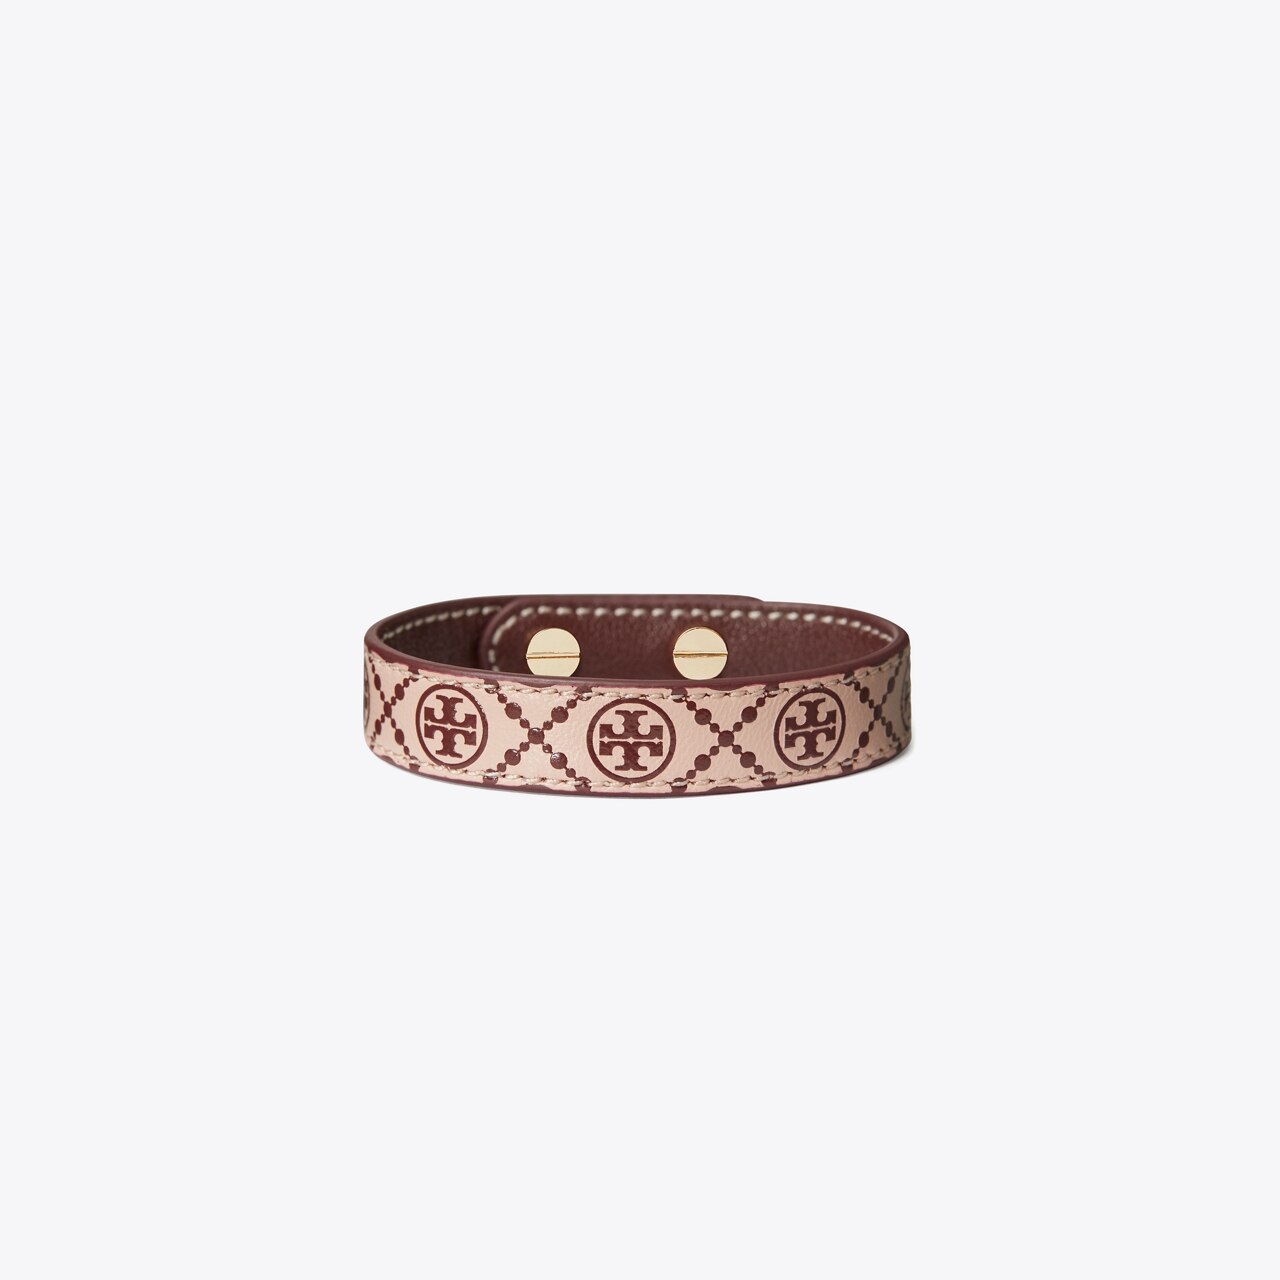 Monogram and Leather Bracelets in Fashion Jewellery for Women